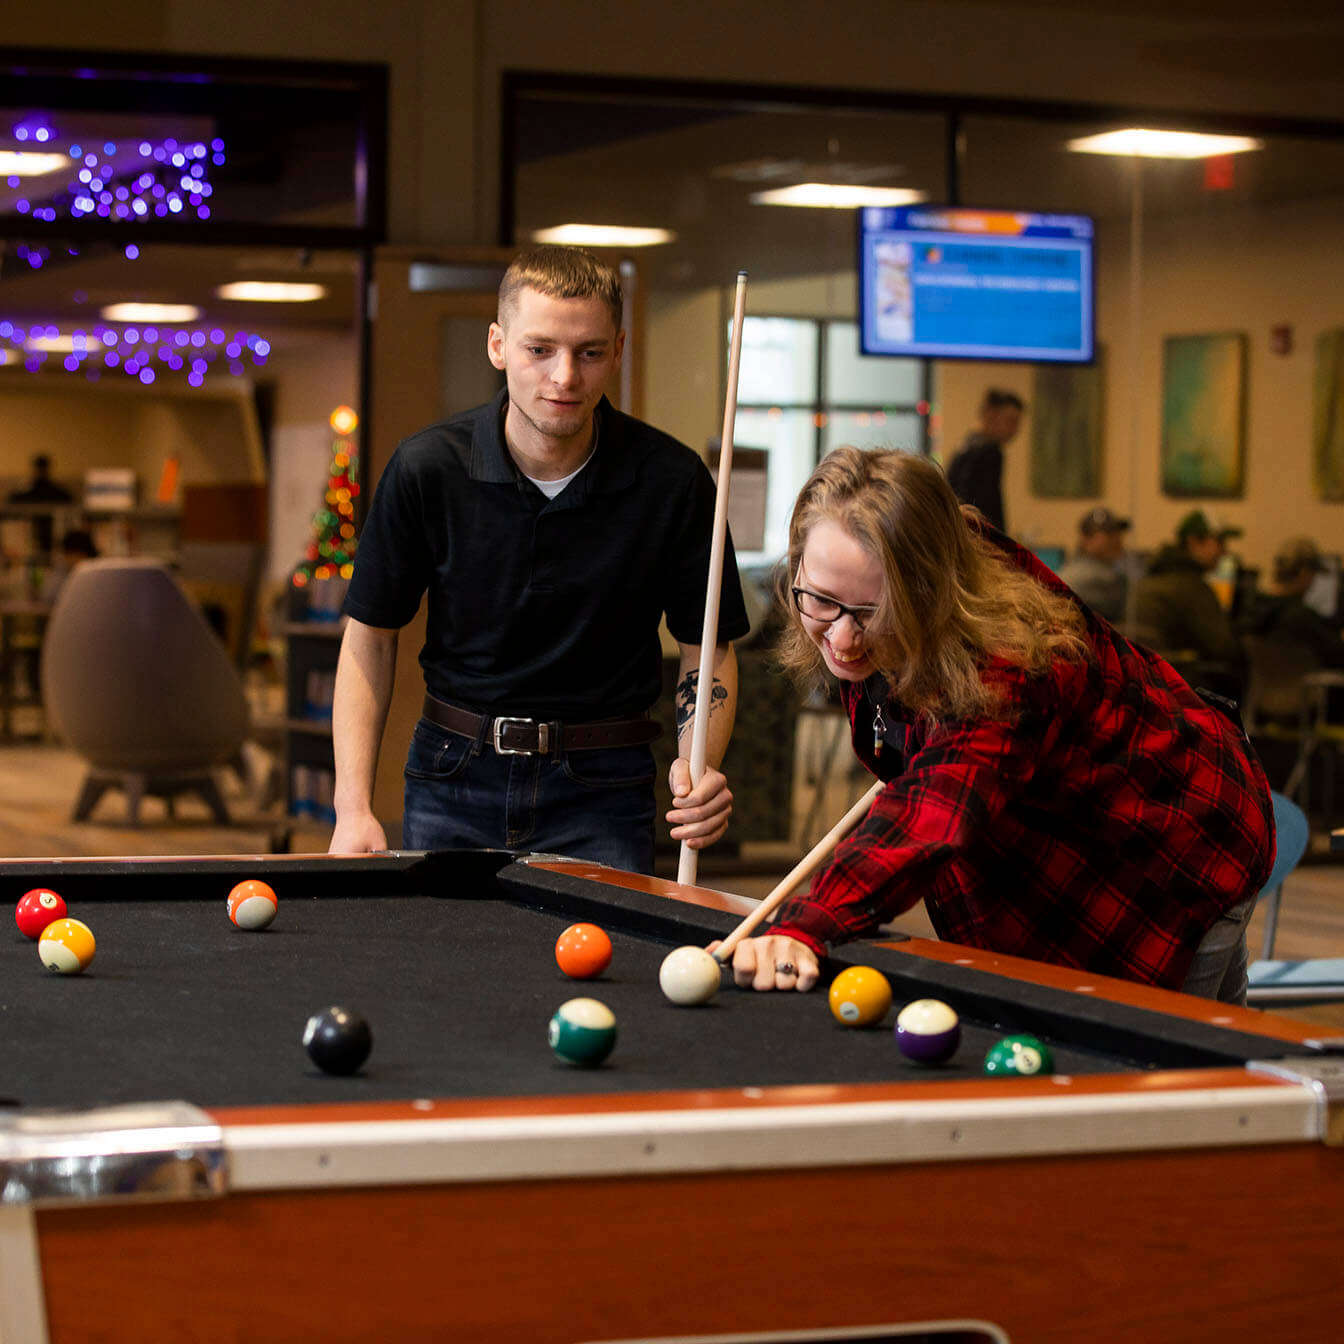 Two students playing pool on campus